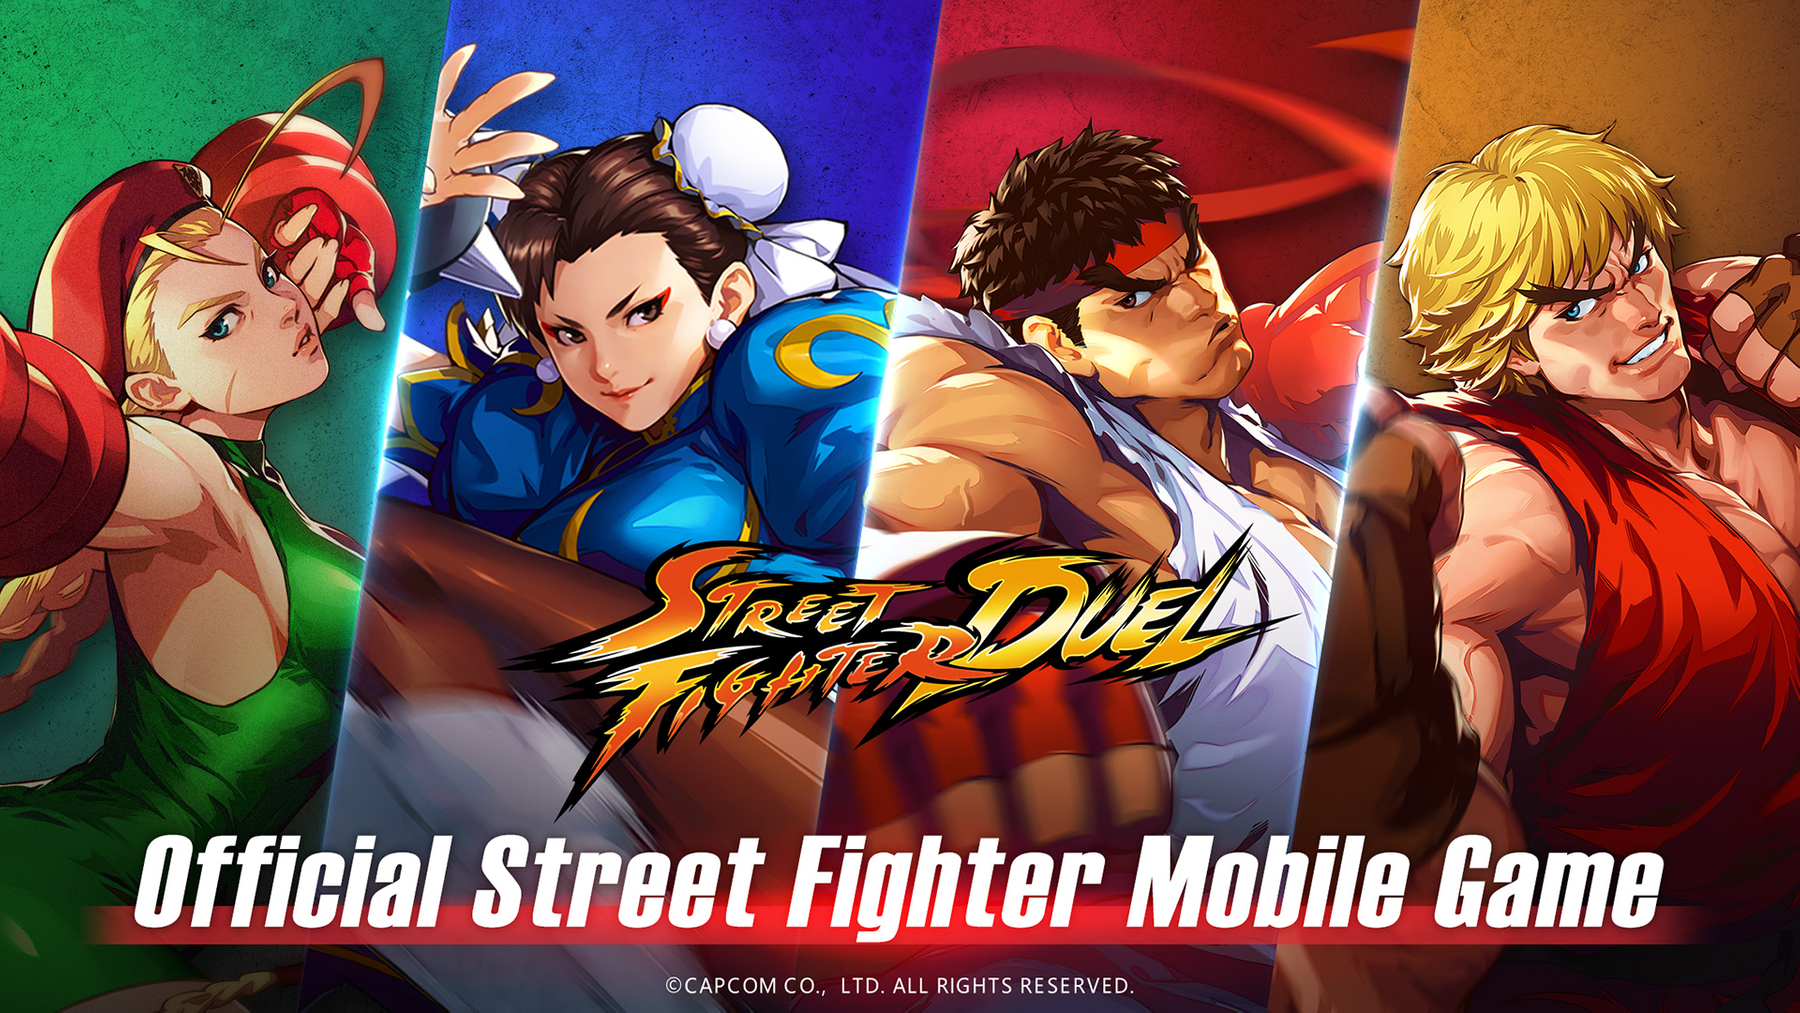 Official Street Fighter Mobile Game